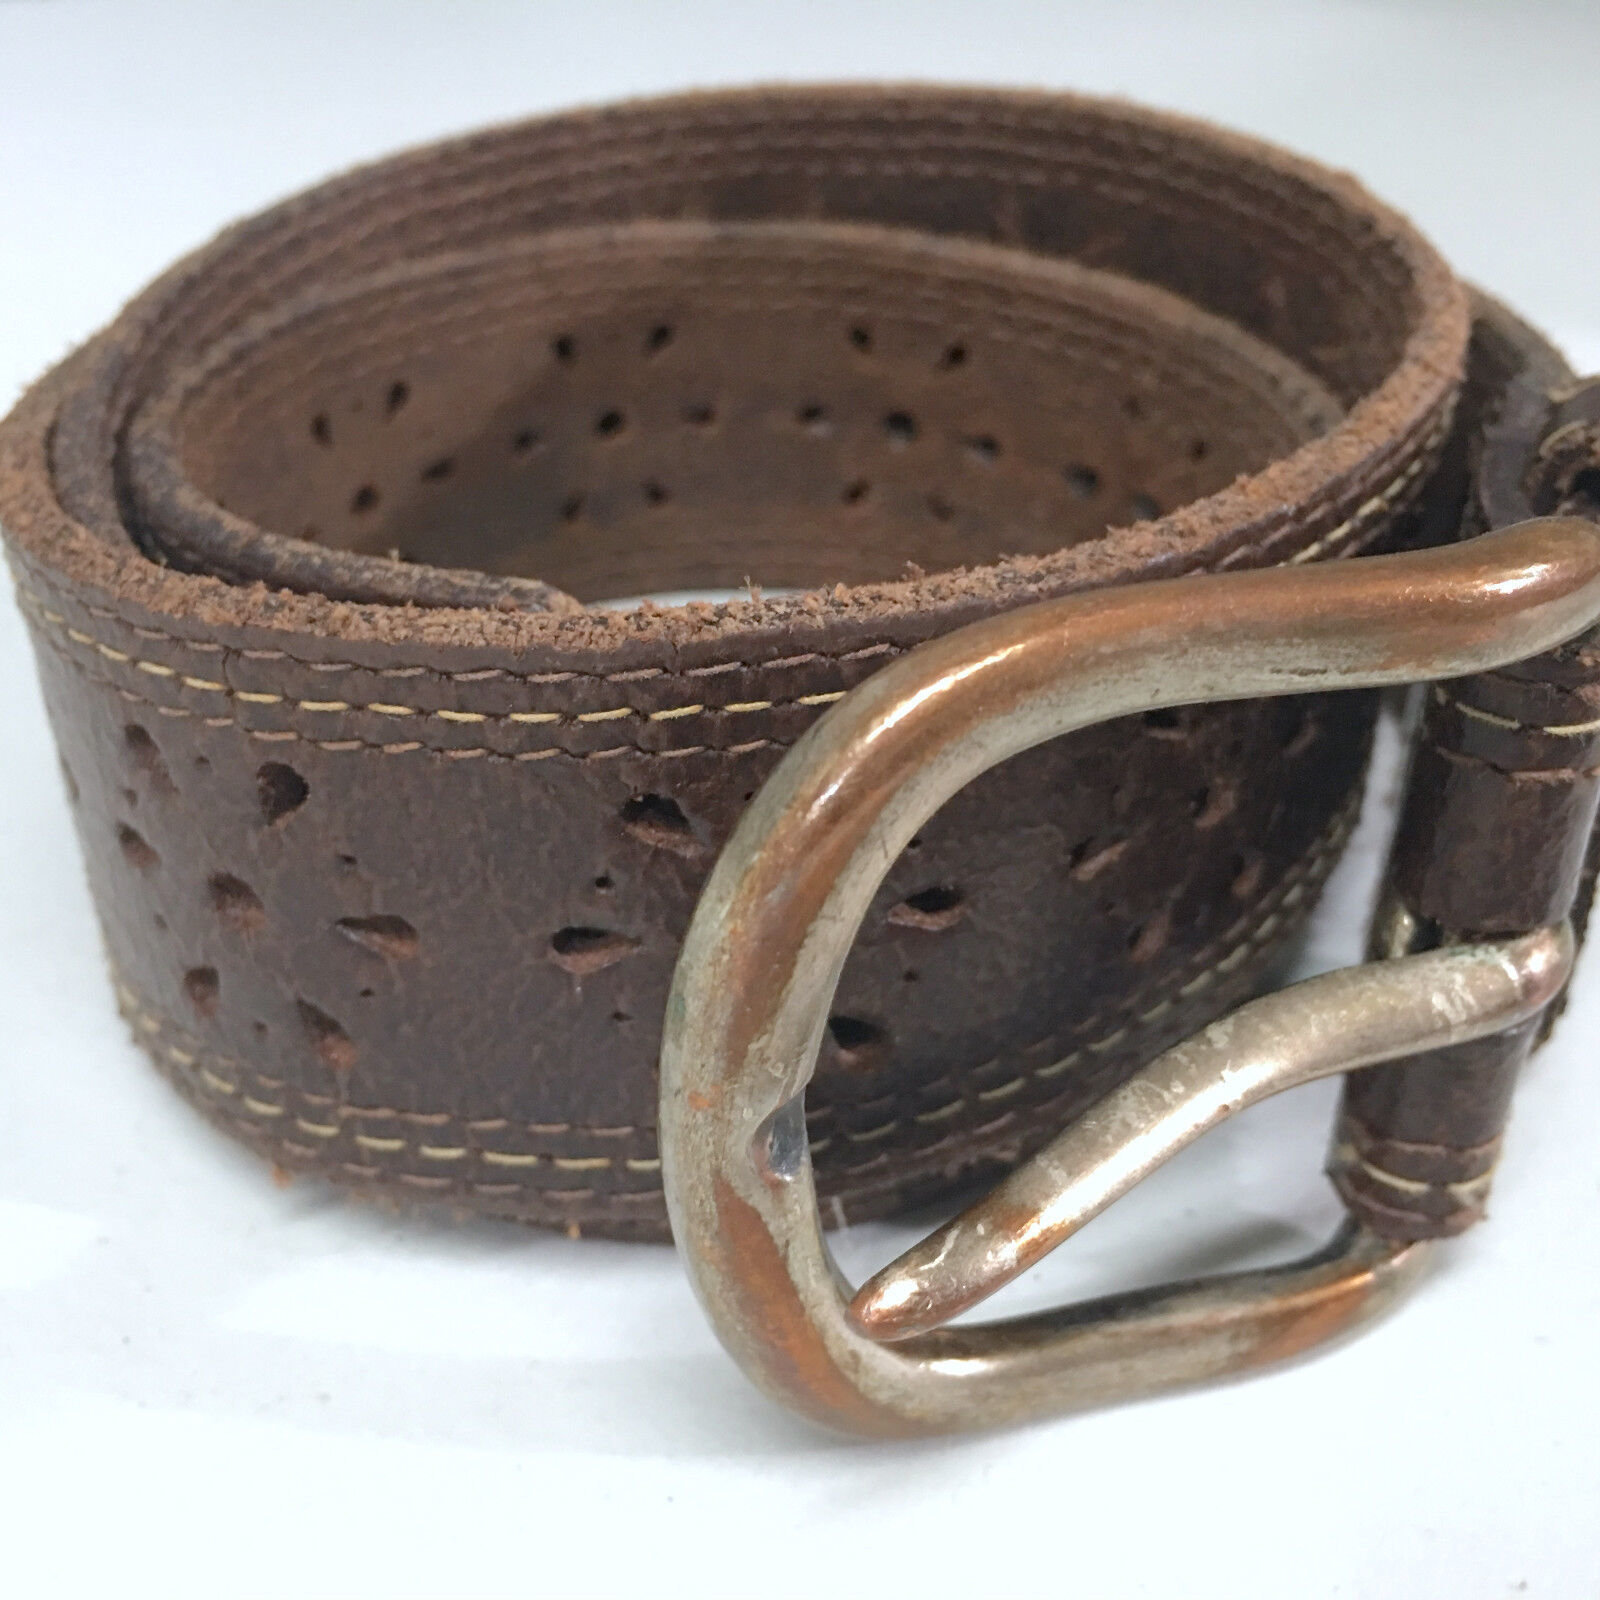 Primary image for Brown Leather Womens Die Cut Flowers Medium Fashion Belt Made in Italy 1.5" 